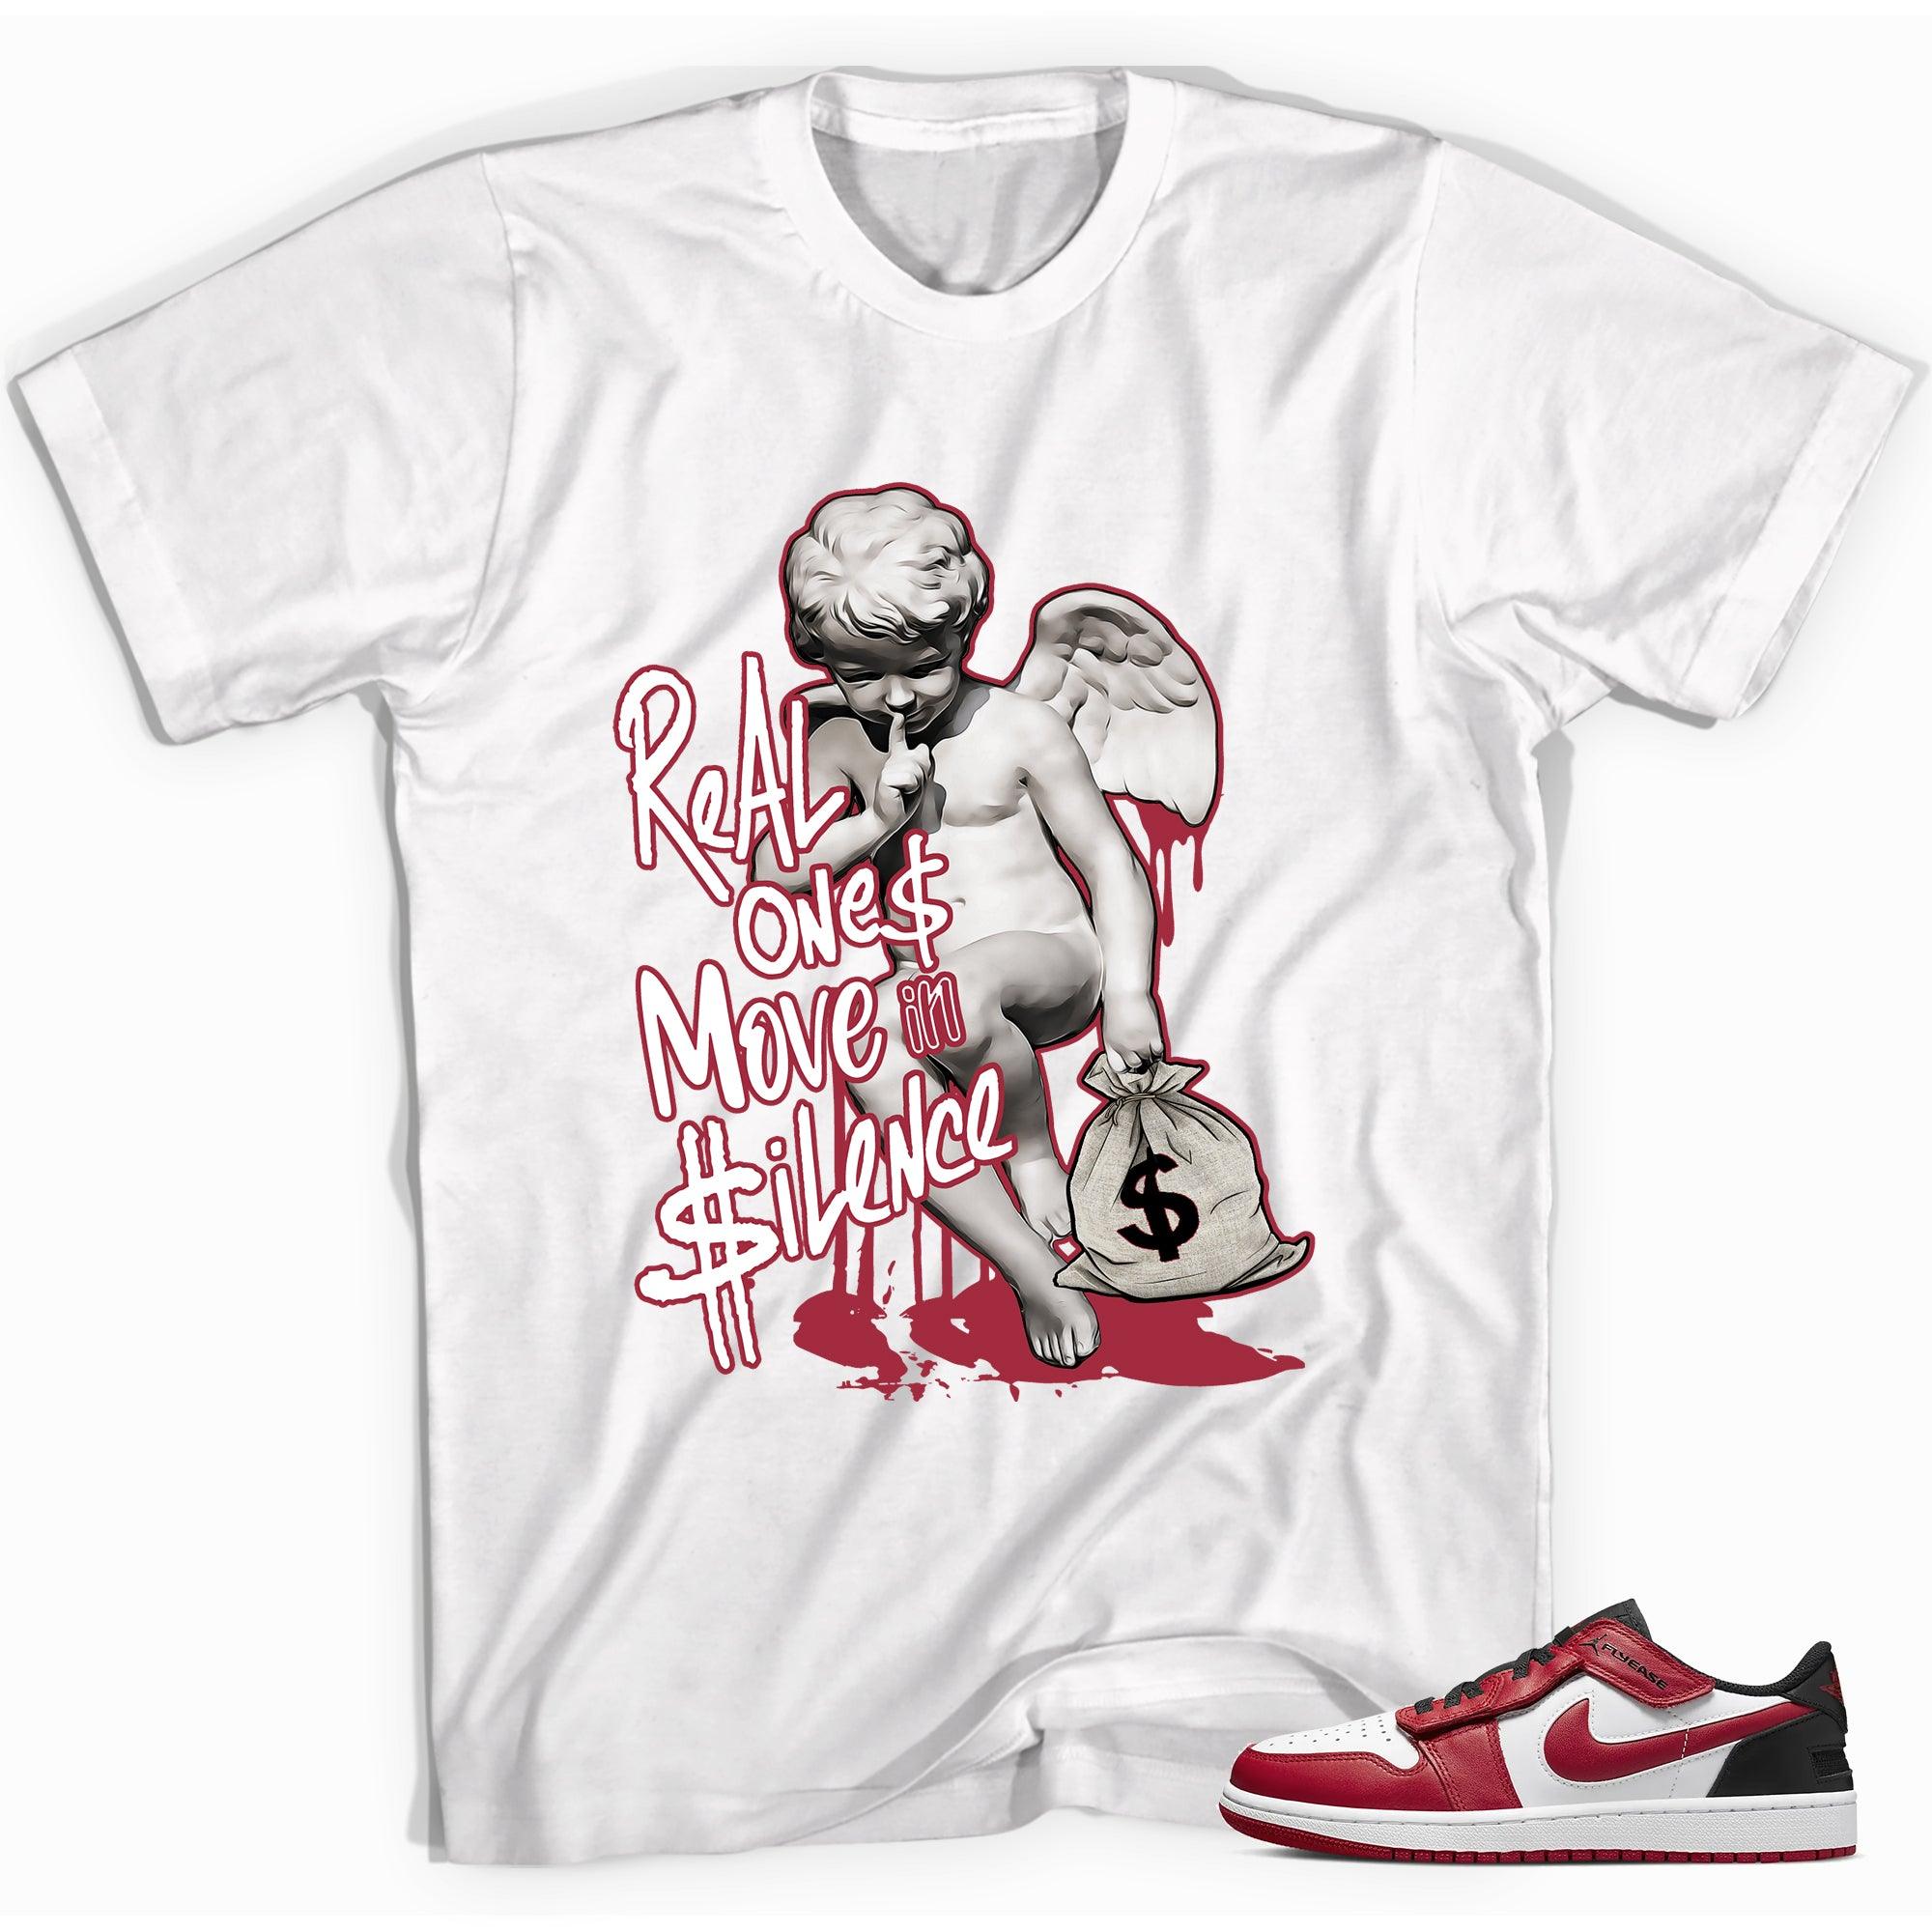 Move in Silence Shirt Jordan 1s Low Fly Ease photo